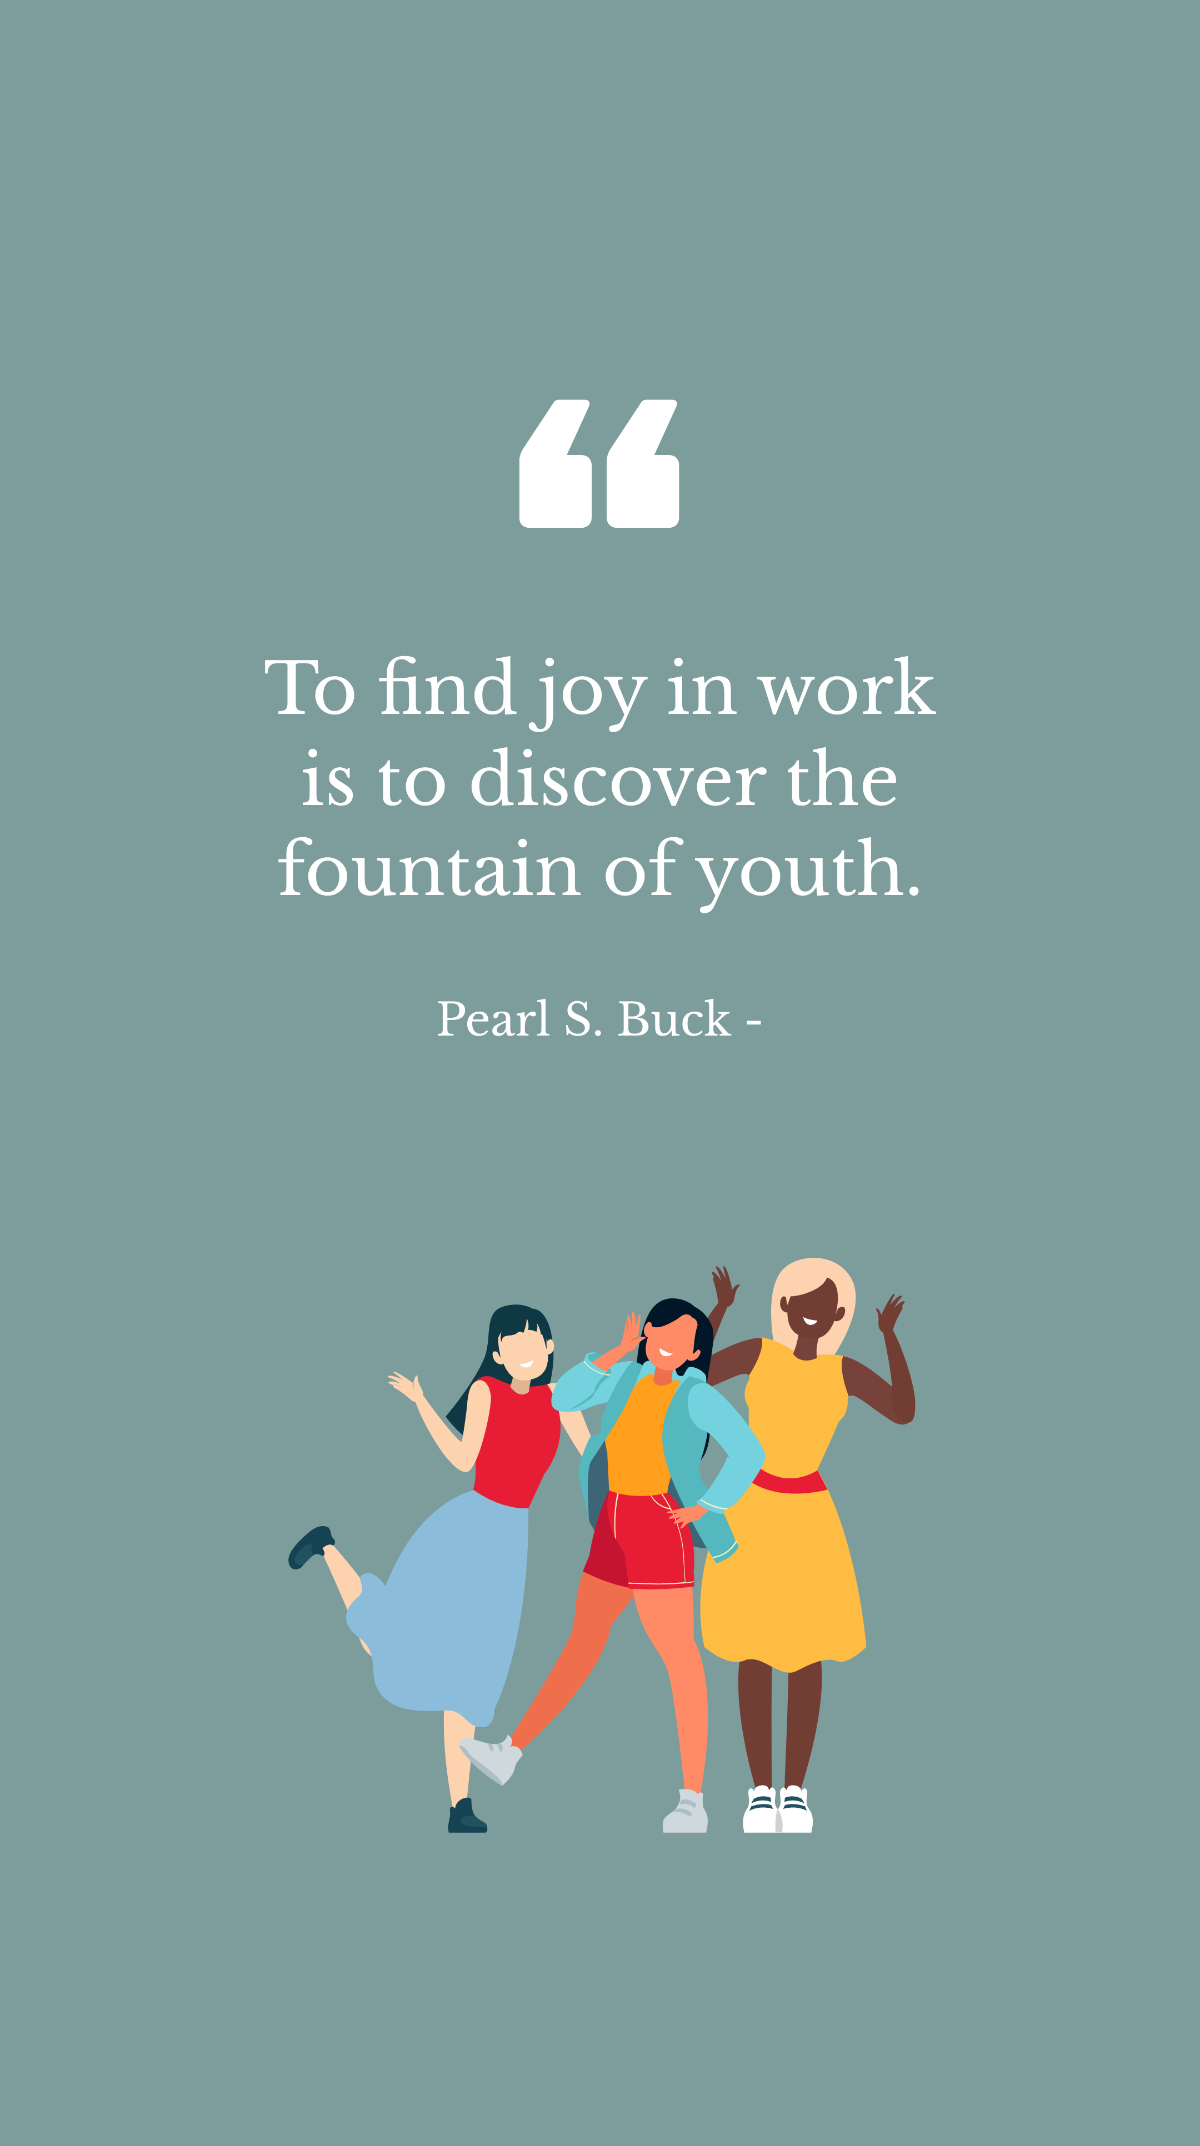 Pearl S. Buck - To find joy in work is to discover the fountain of youth. Template